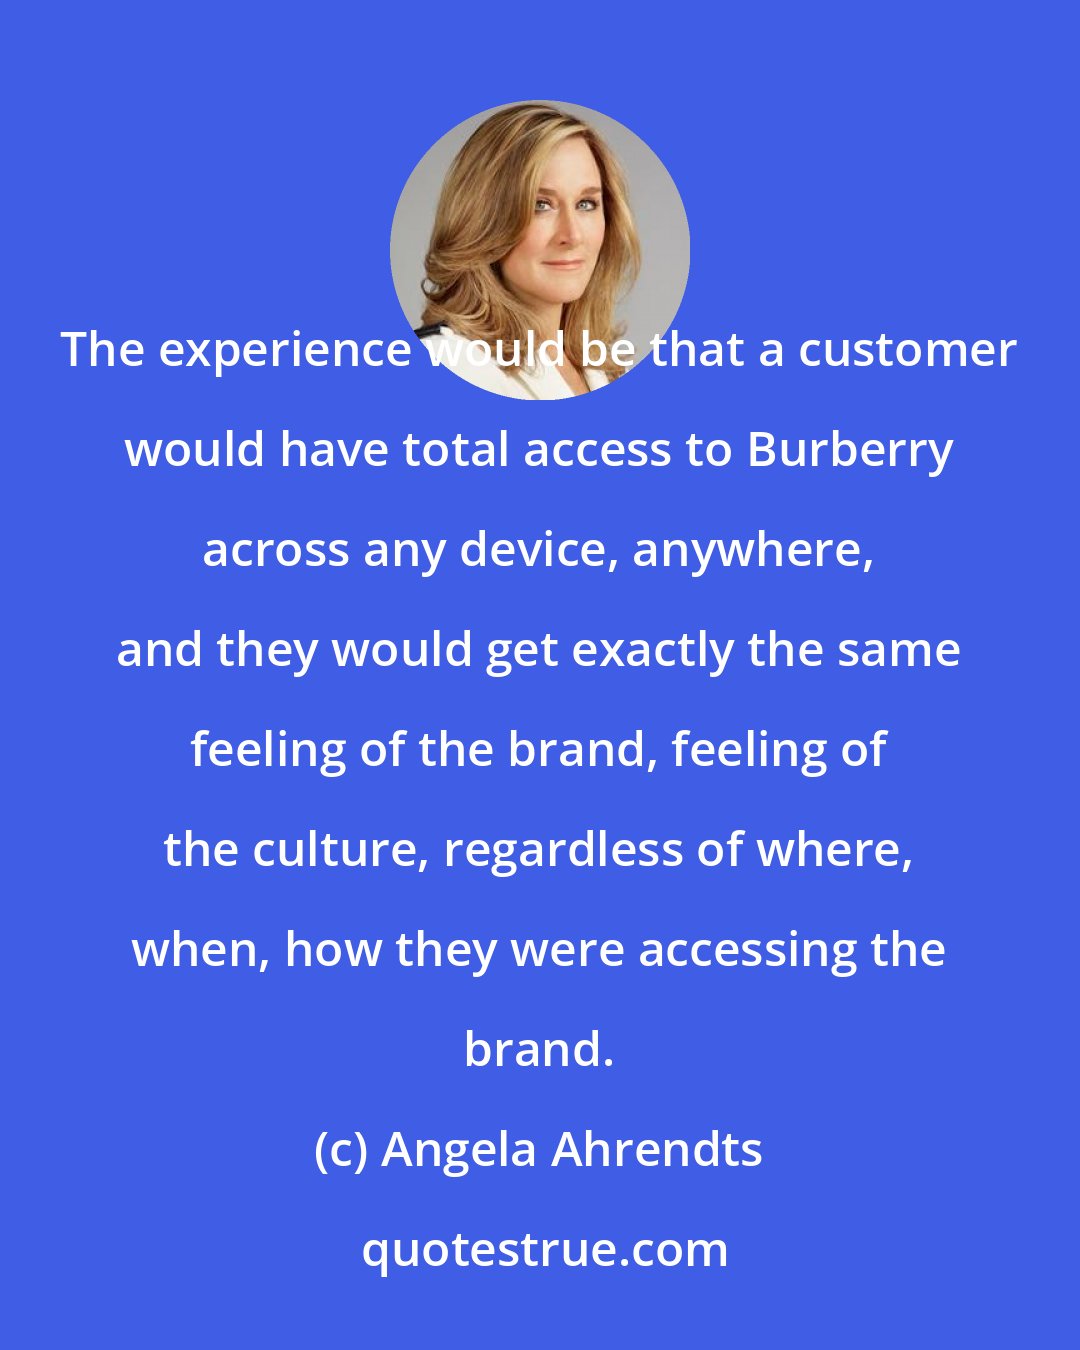 Angela Ahrendts: The experience would be that a customer would have total access to Burberry across any device, anywhere, and they would get exactly the same feeling of the brand, feeling of the culture, regardless of where, when, how they were accessing the brand.